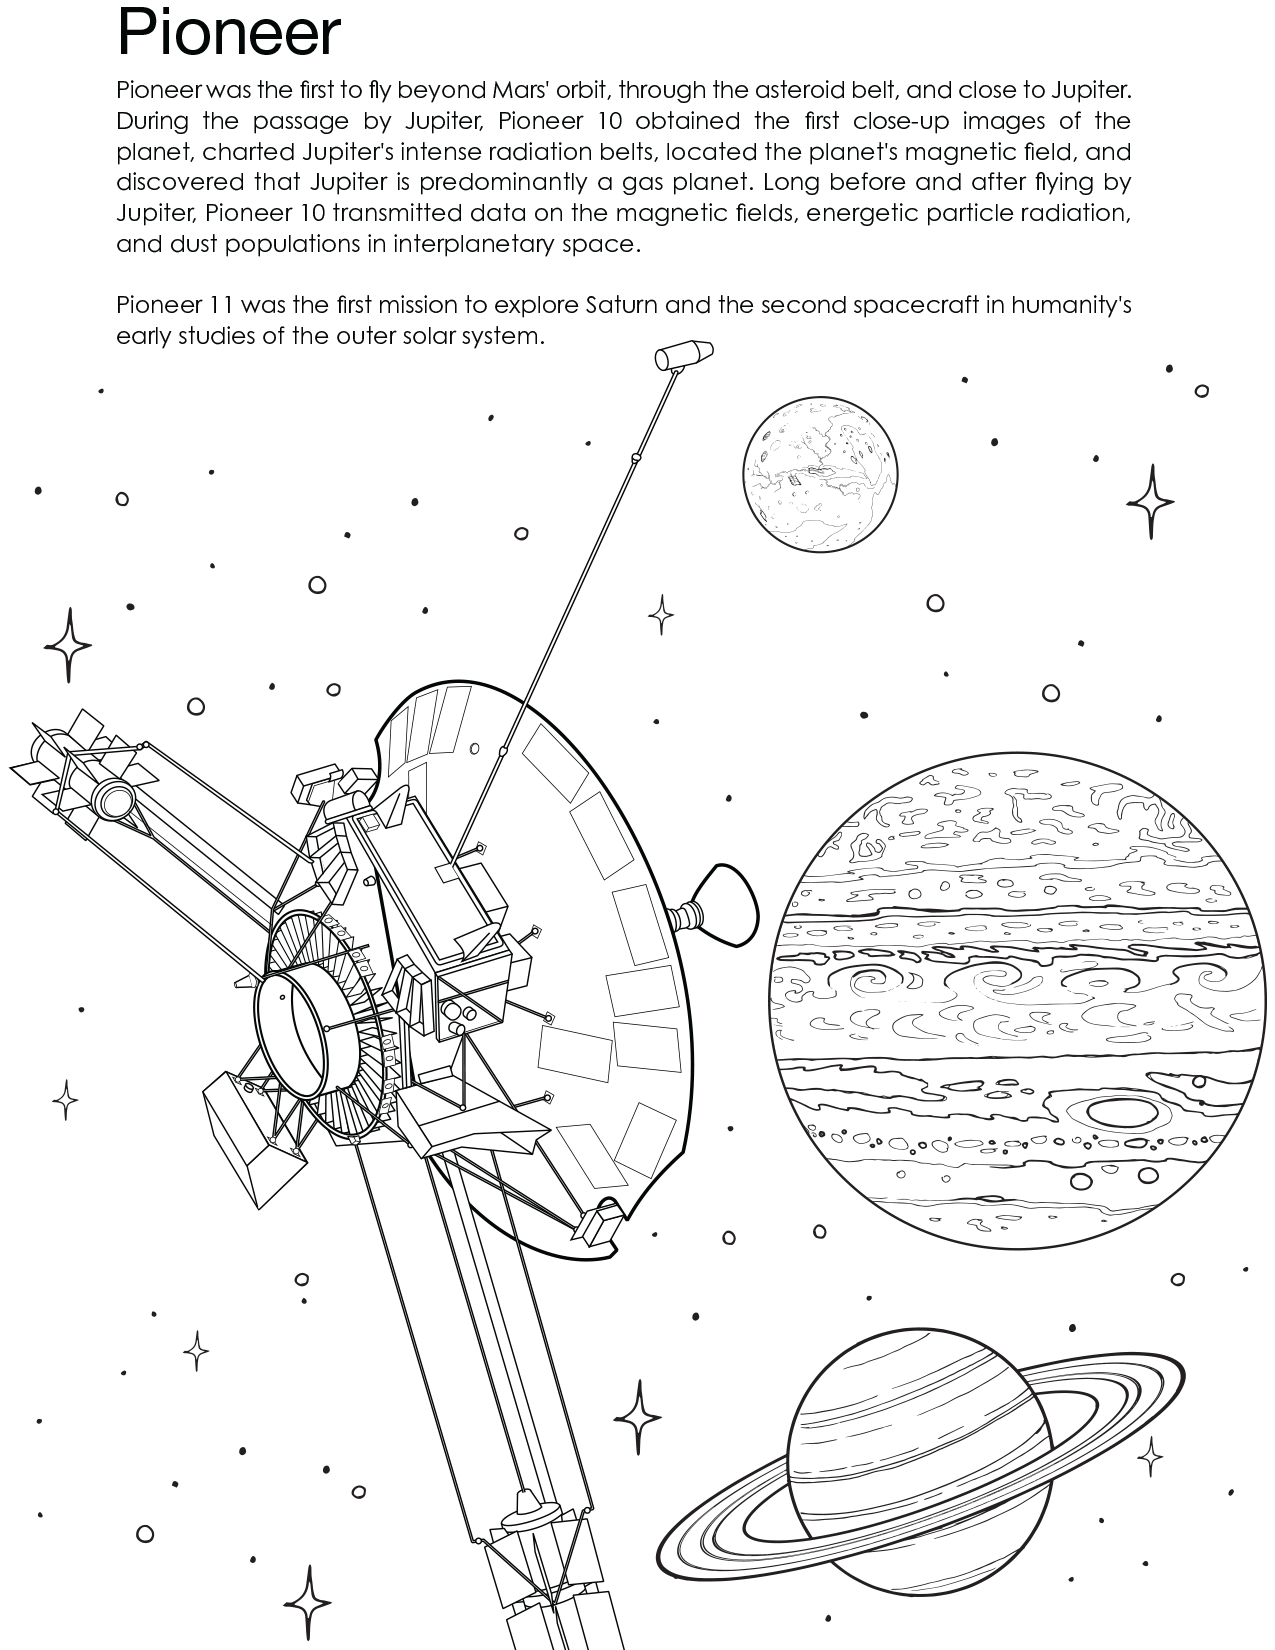 Coloring page for Pioneer 10 & 11.